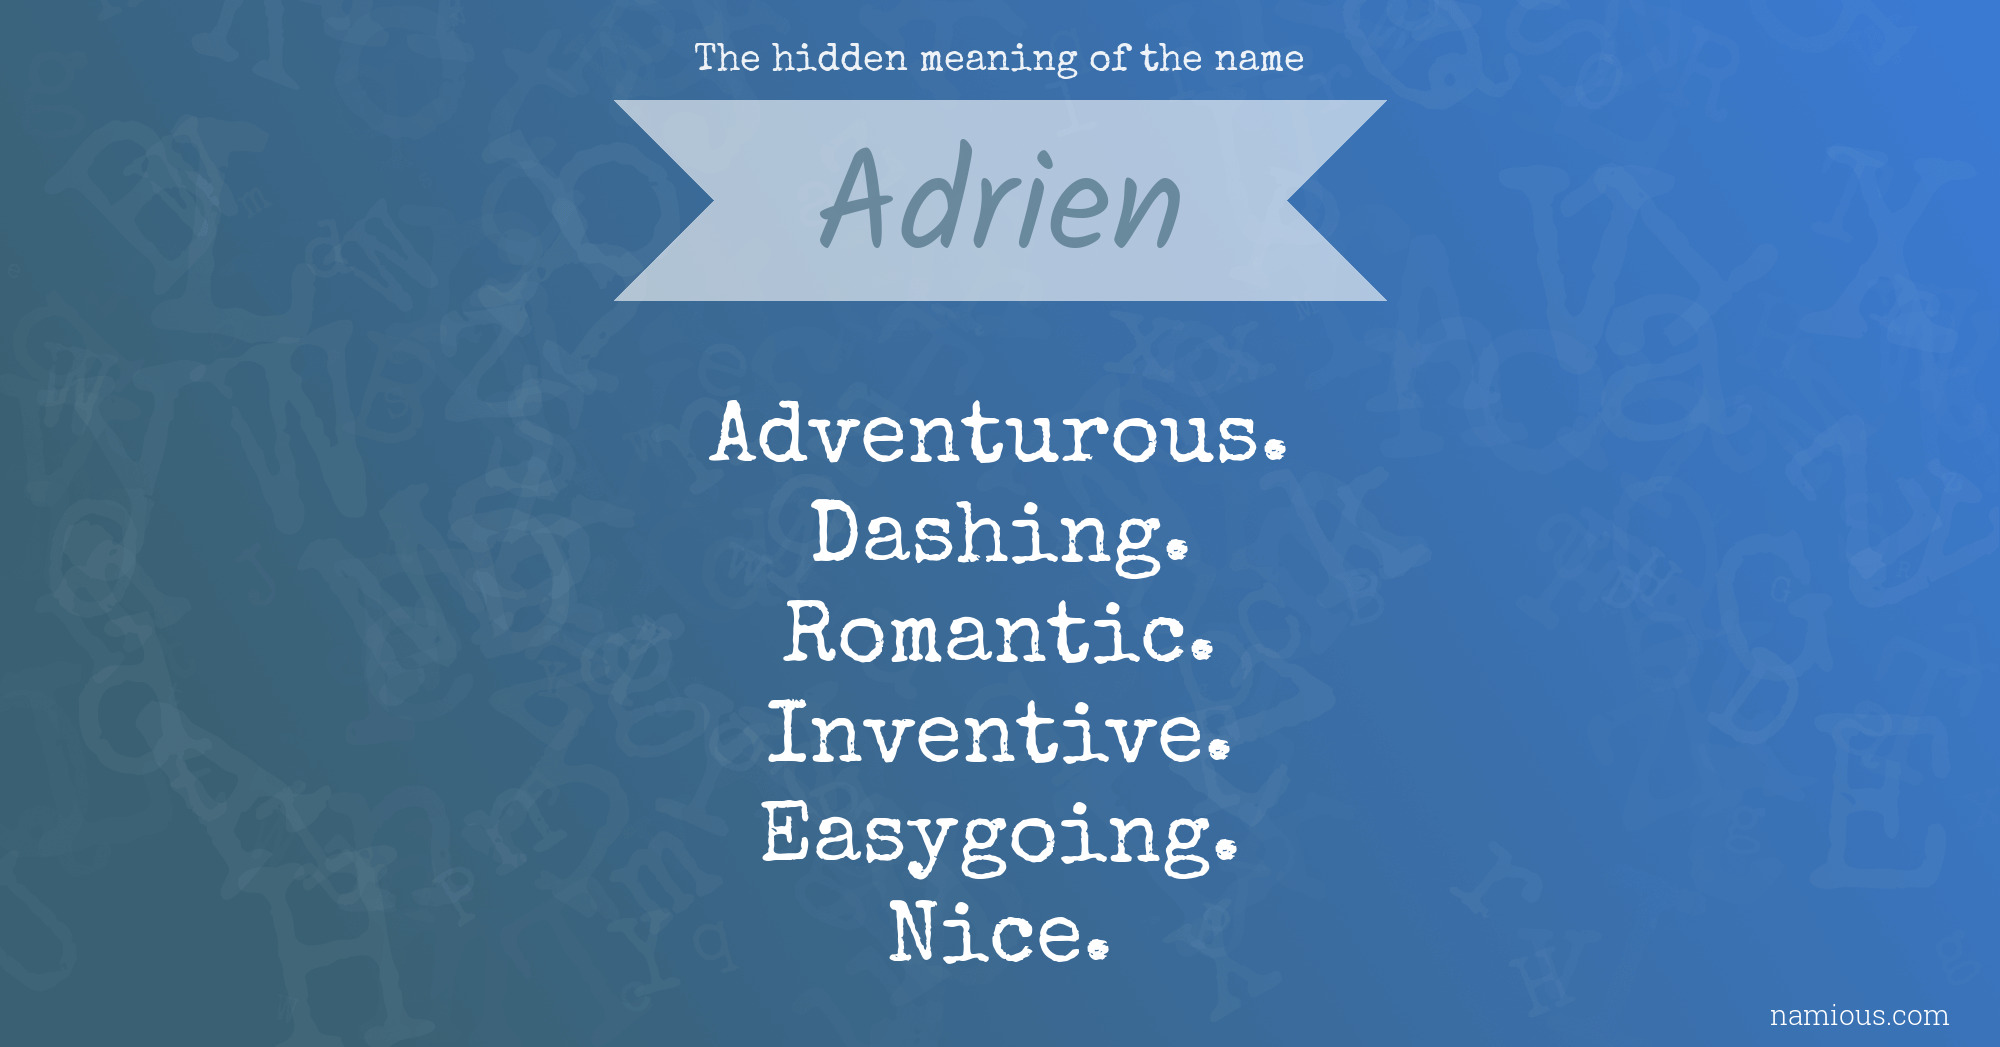 The hidden meaning of the name Adrien